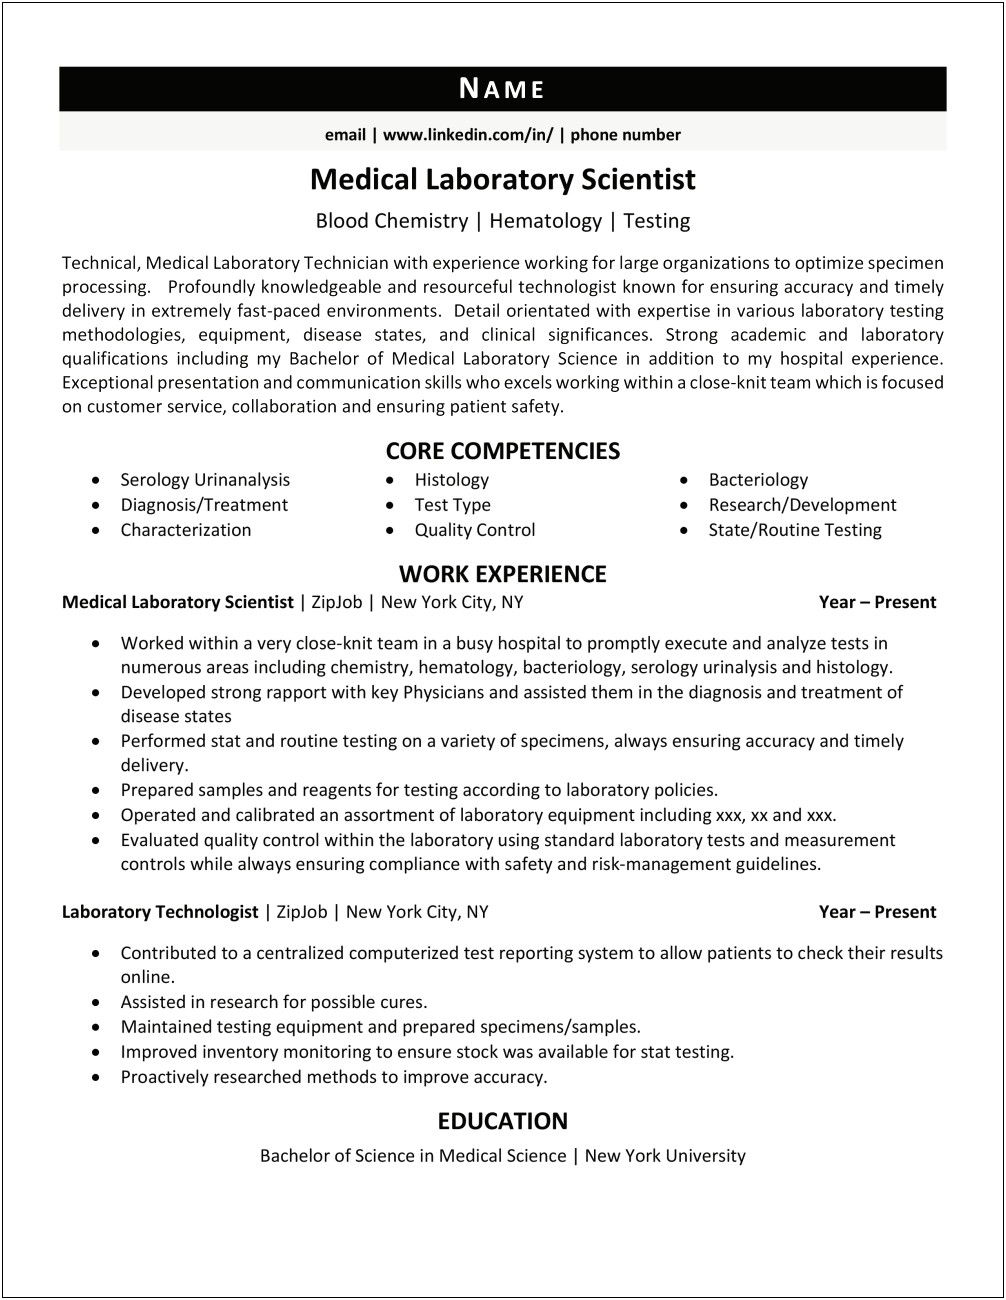 Examples Of Medical Laboratory Technician Resumes